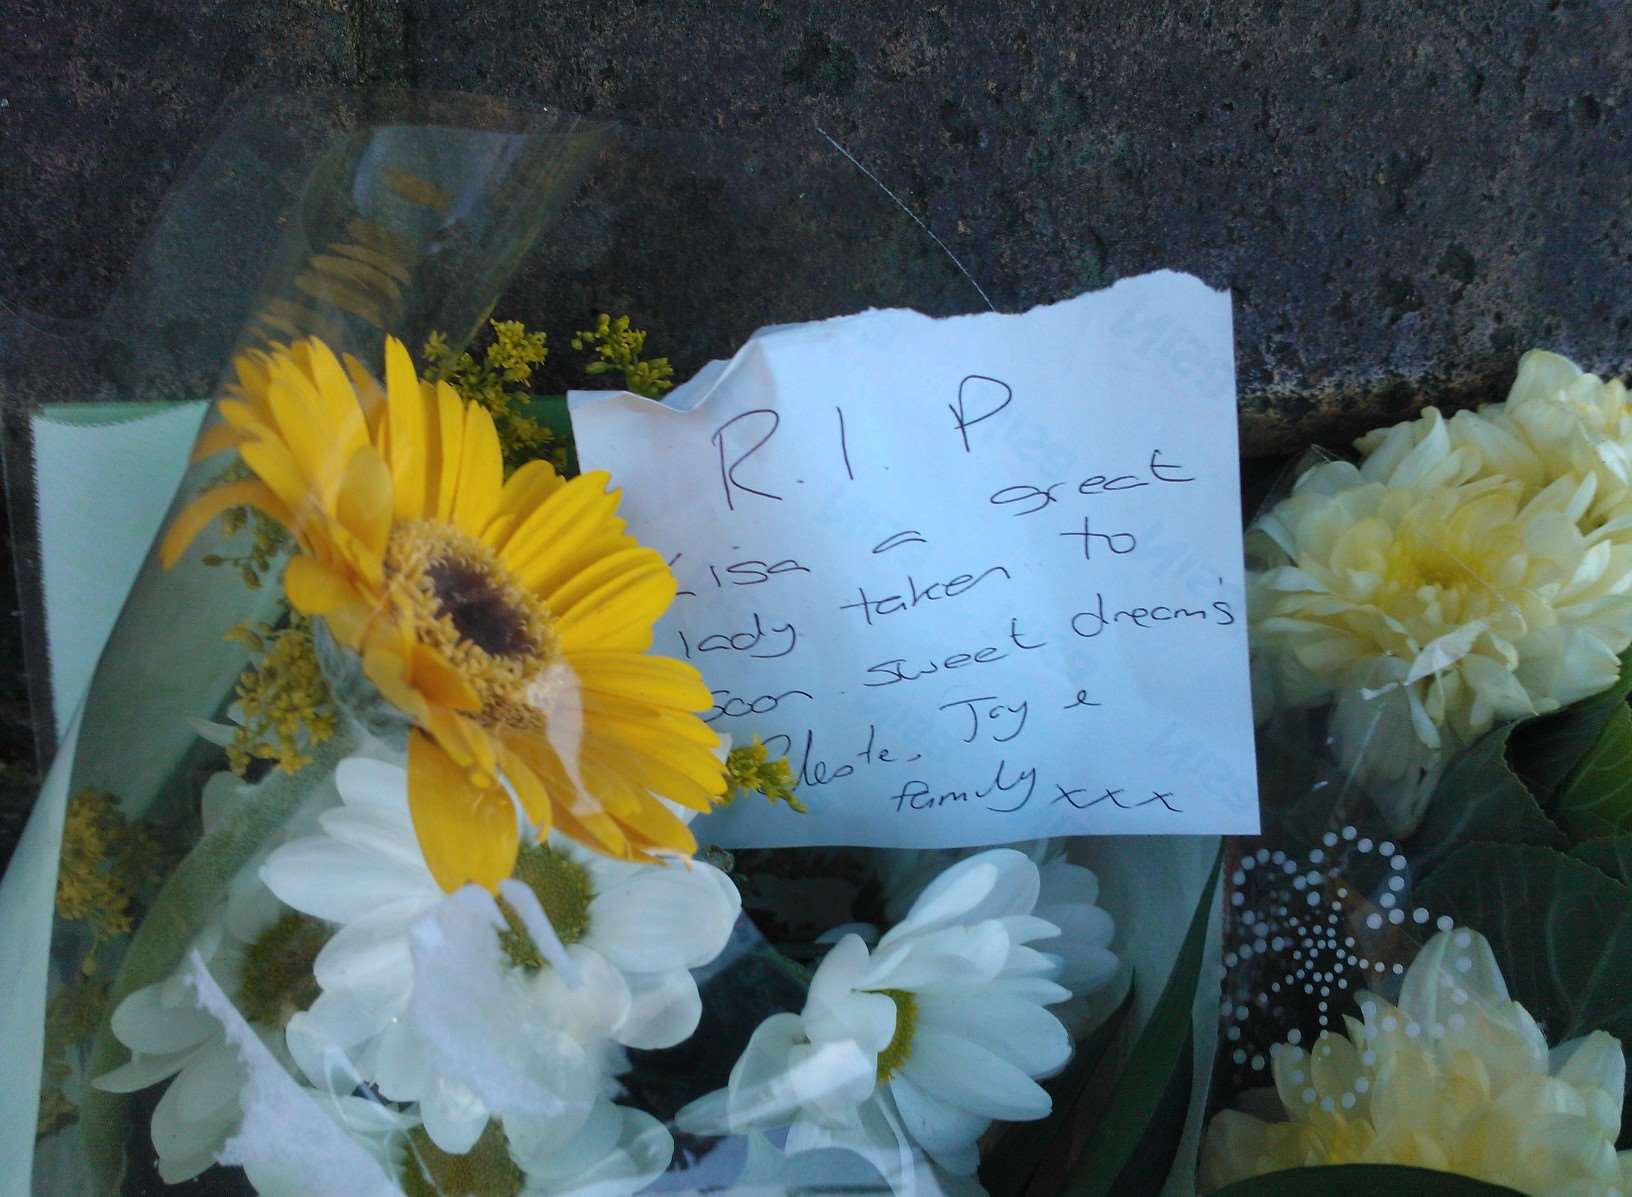 Floral tributes left at the scene following Lisa's death